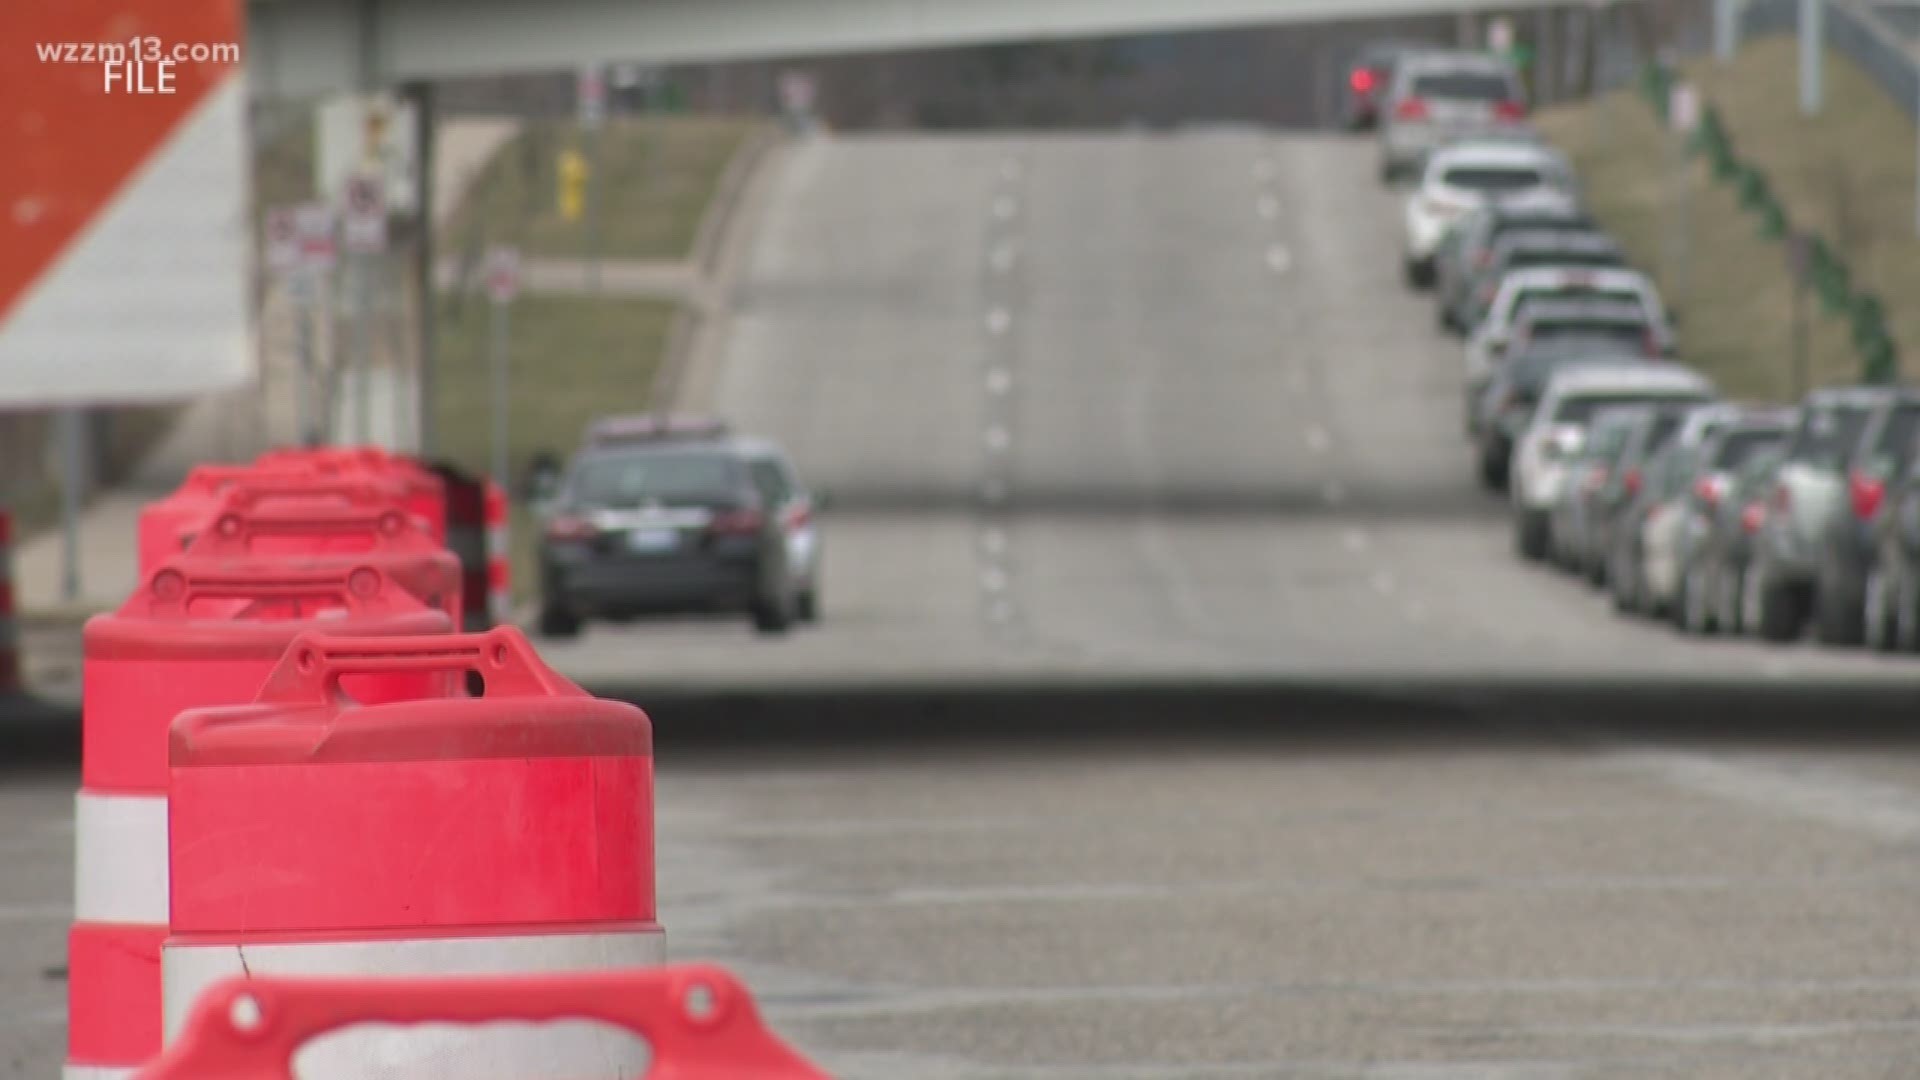 The eastbound I-196 ramp to northbound US-131 will be closed Tuesday from 4 a.m. until 1 p.m. The Michigan Department of Transportation has created a detour: south on US-131 to Pearl Street or Market Avenue, then enter  US-131 NB in that area.